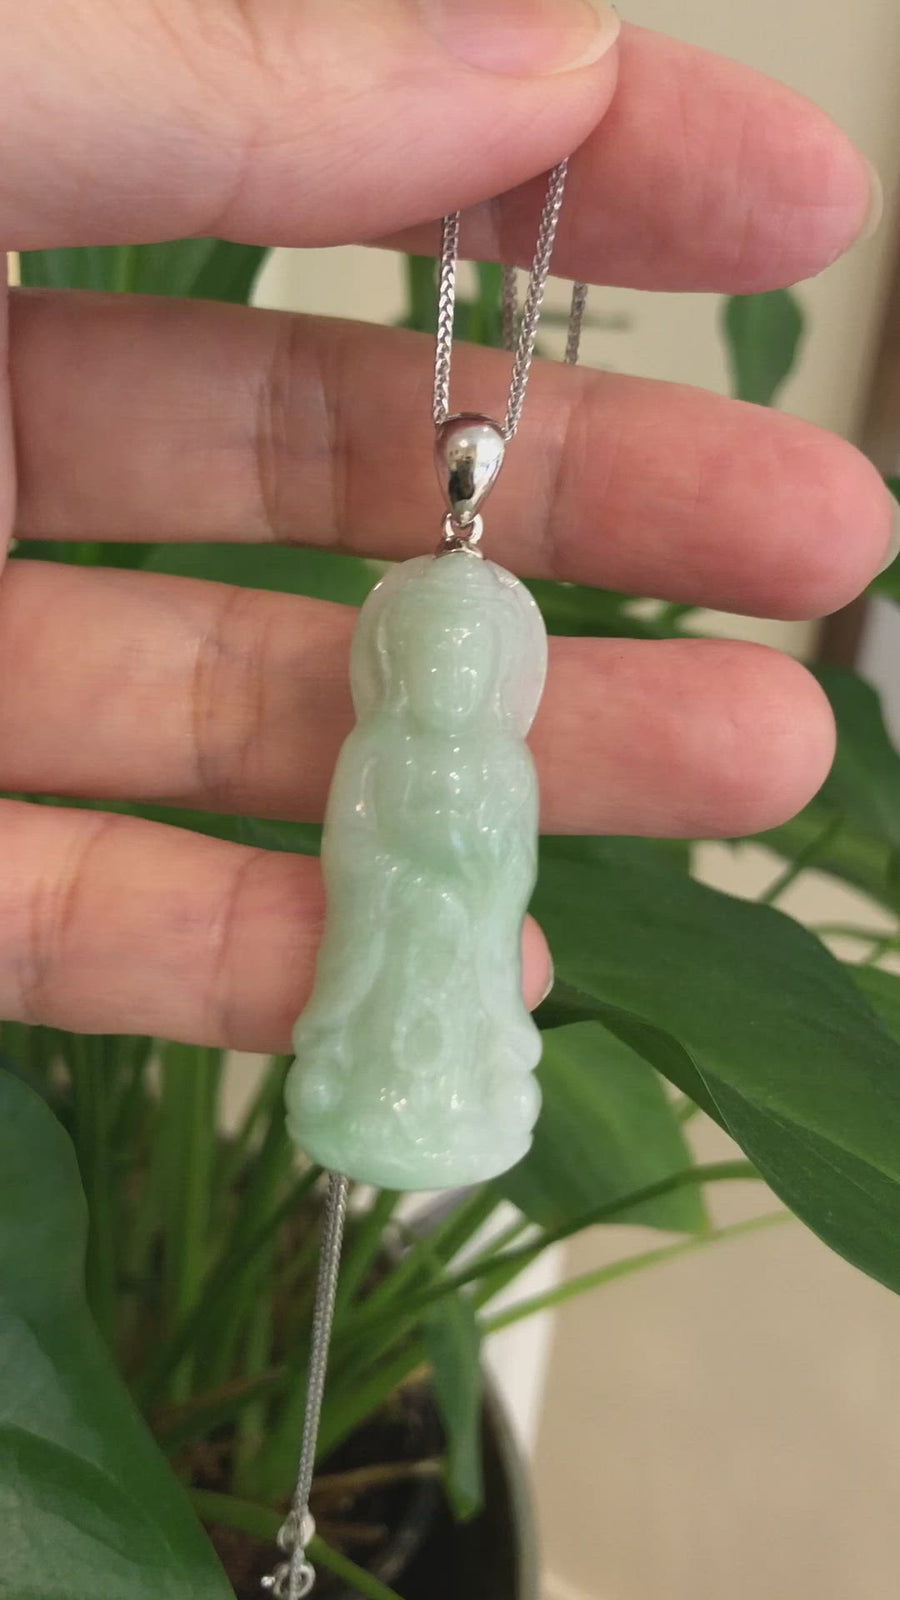 Genuine Burmese Jadeite Jade Green Guanyin Pendant Necklace With Silver Bail